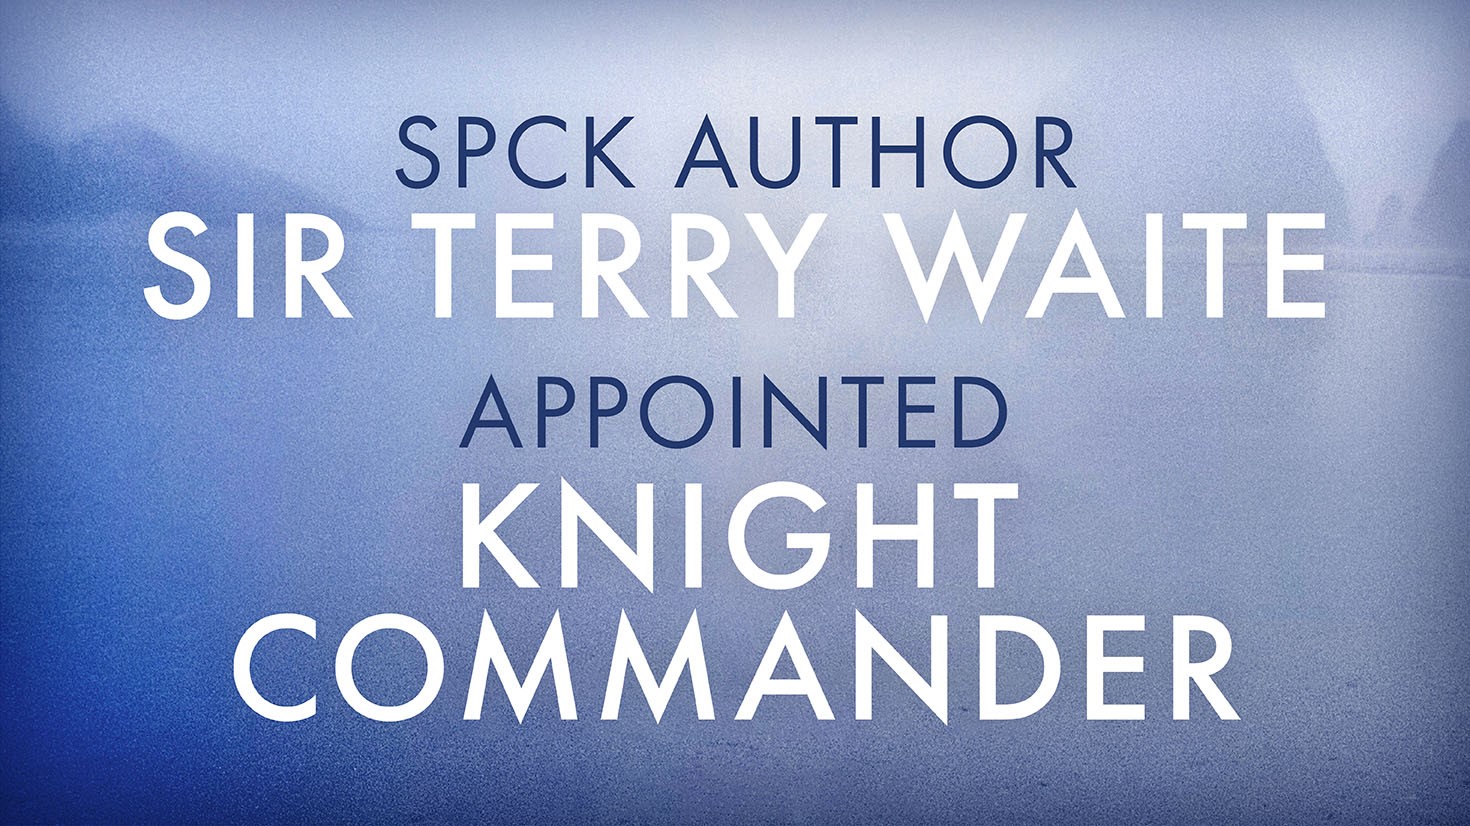 SPCK Author Sir Terry Waite appointed Knight Commander